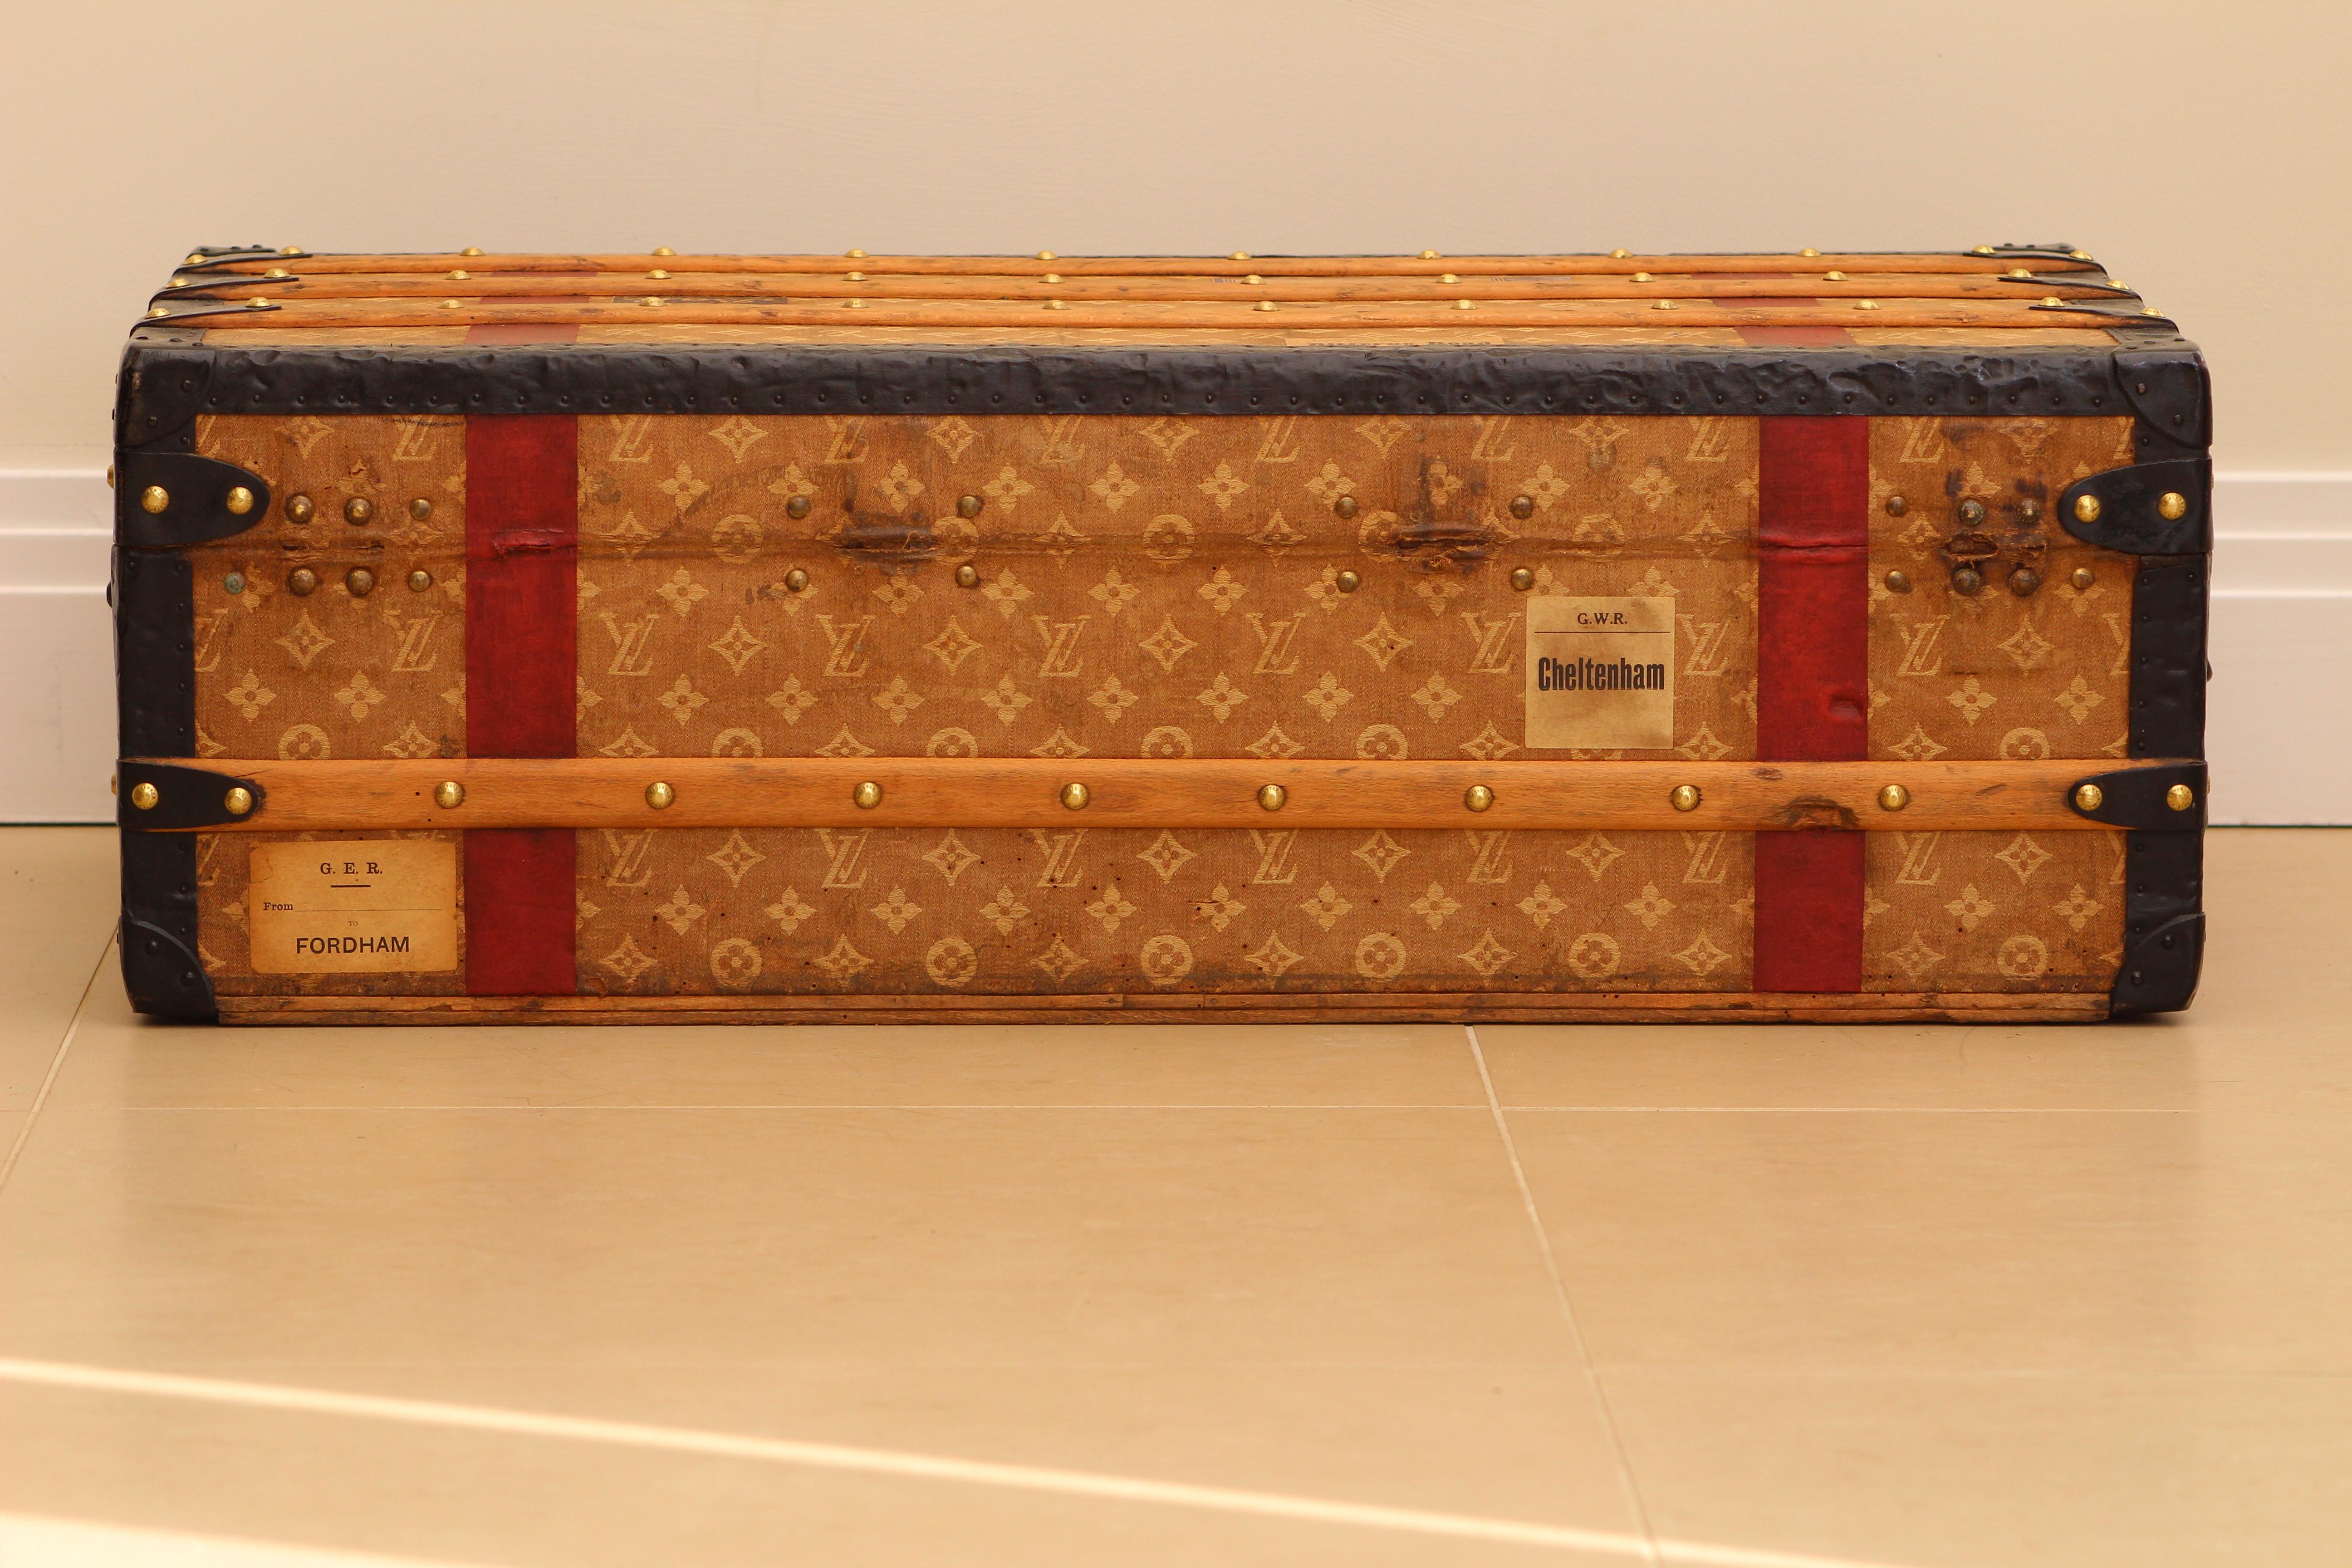 

The 1900s Louis Vuitton cabin trunk is an evocative artifact that weaves tales of grandeur, history, and an era of opulent travels. At first glance, it presents itself as more than just a storage unit, exuding an aura of time-honored elegance and